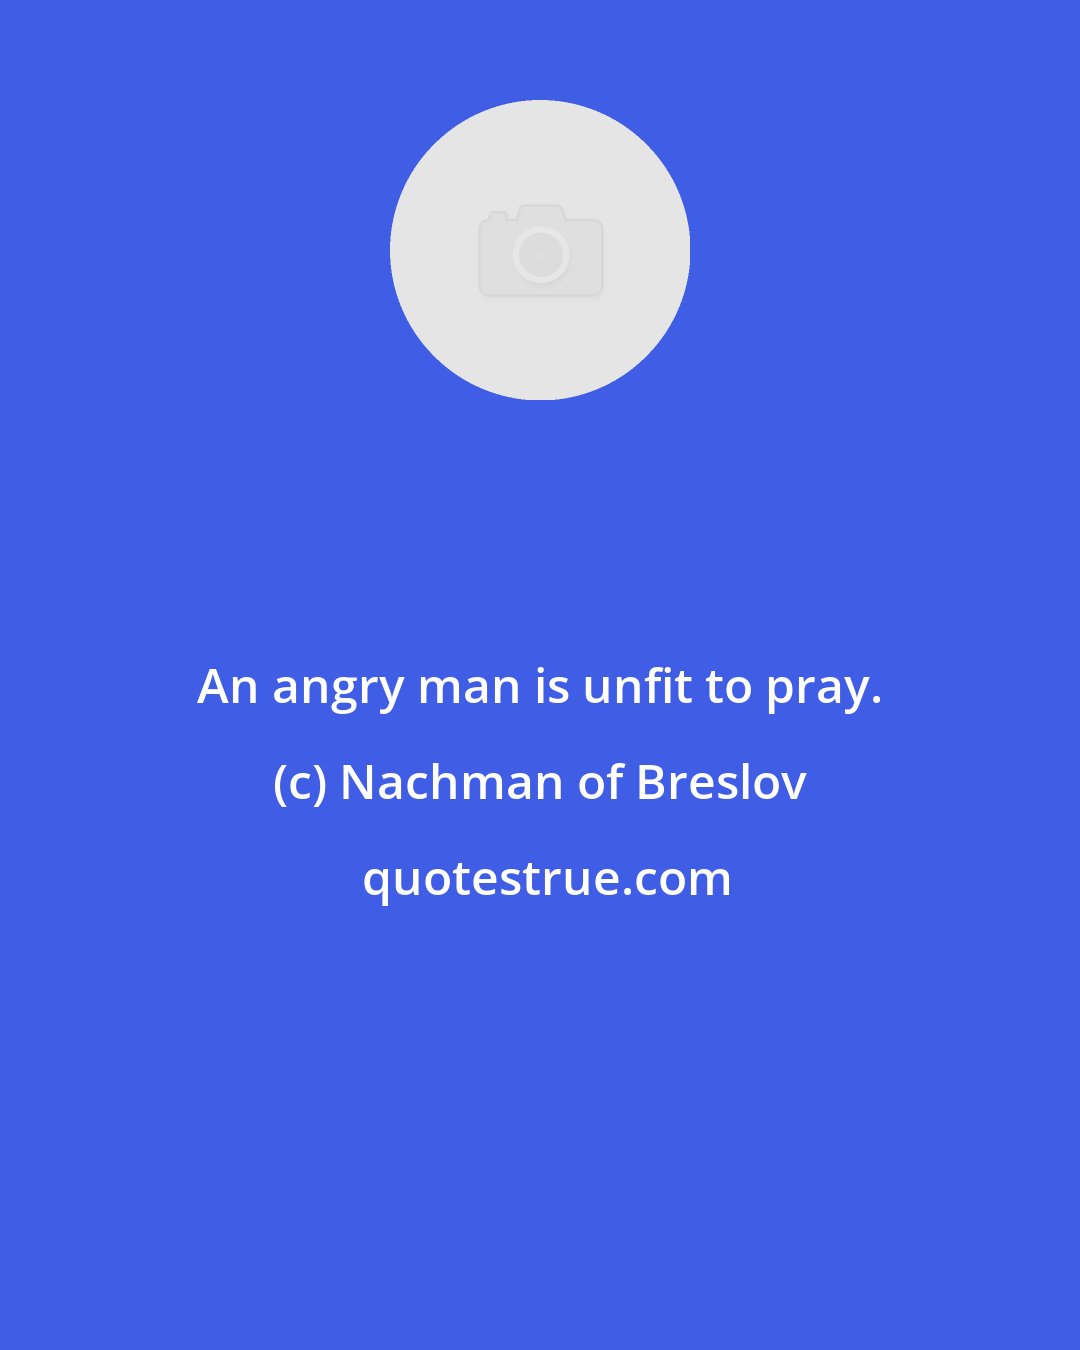 Nachman of Breslov: An angry man is unfit to pray.